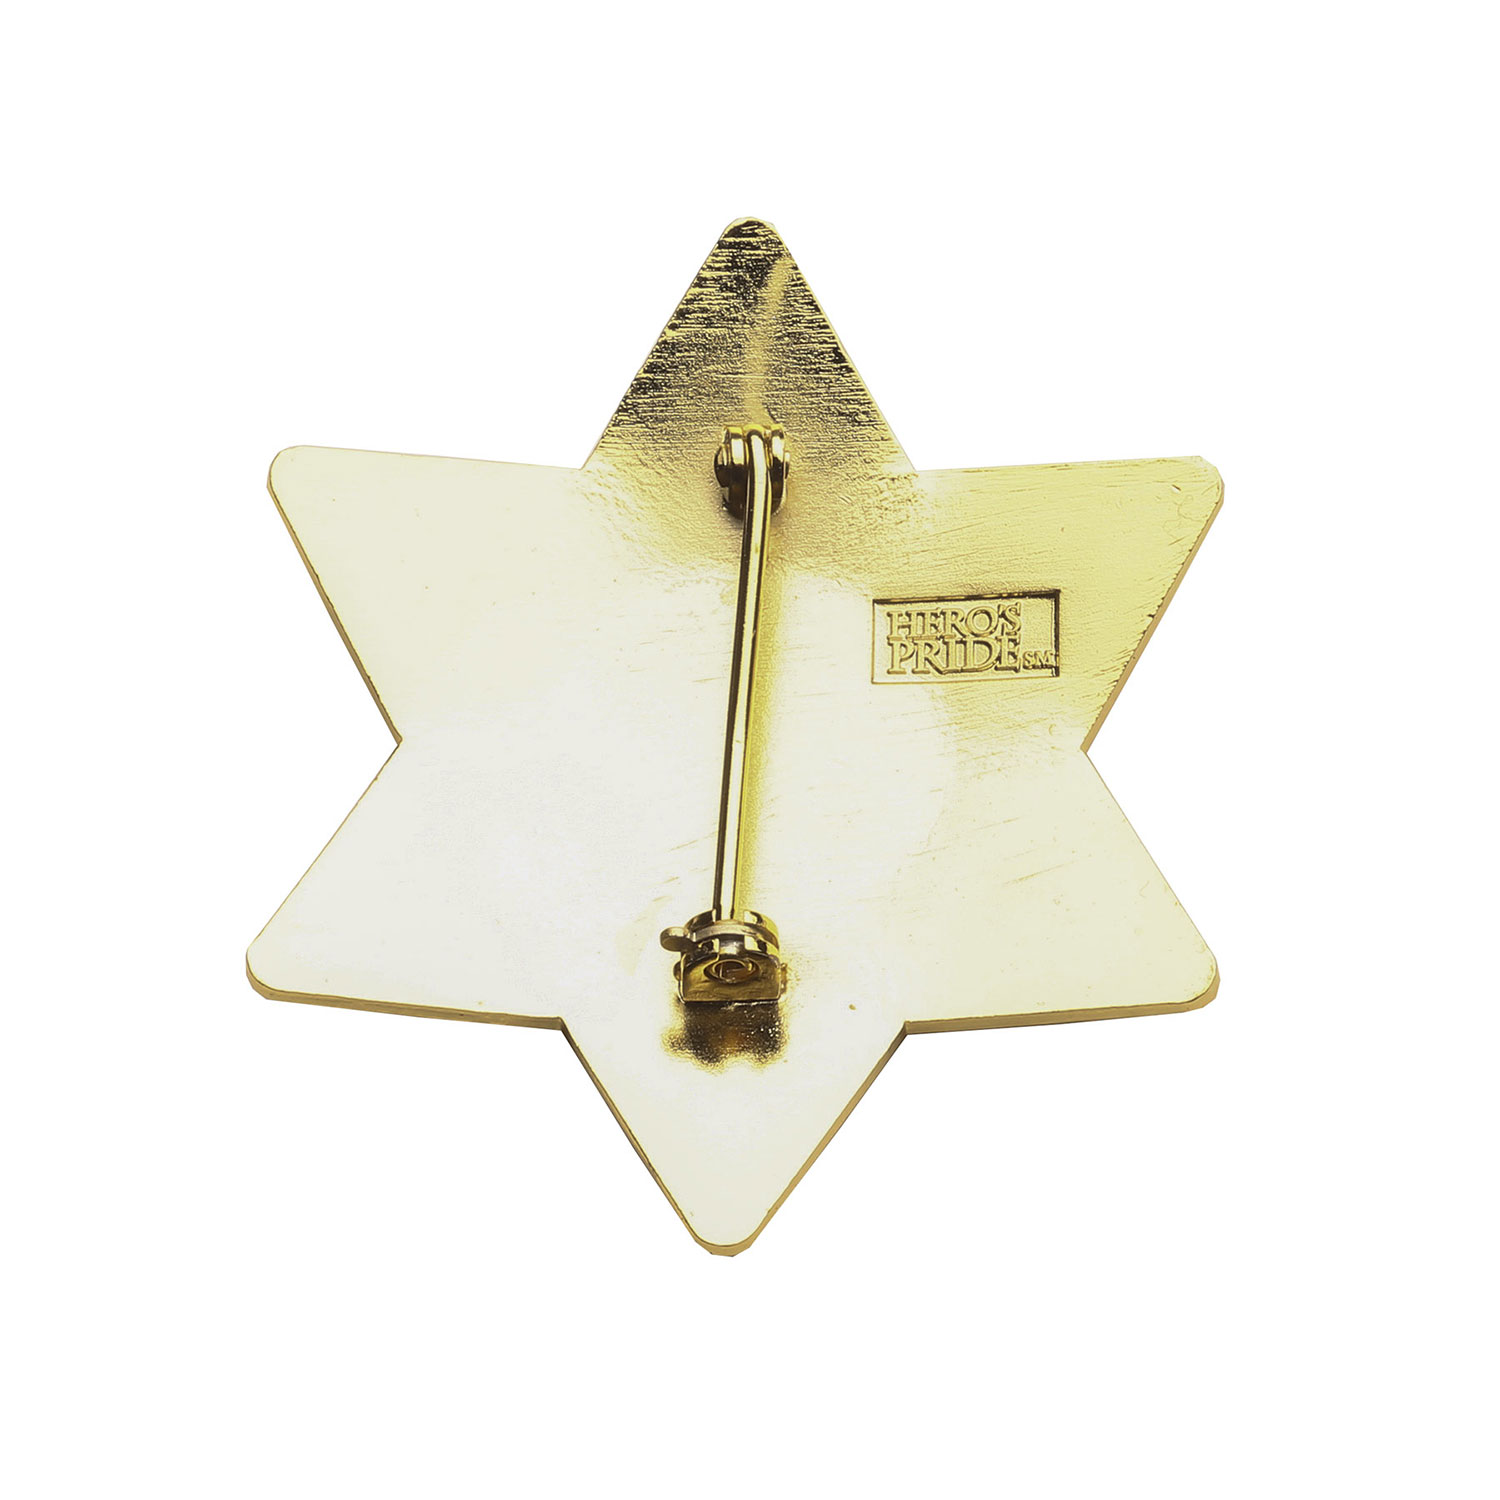 LAWPRO DELUXE SECURITY OFFICER SIX POINT STAR BADGE